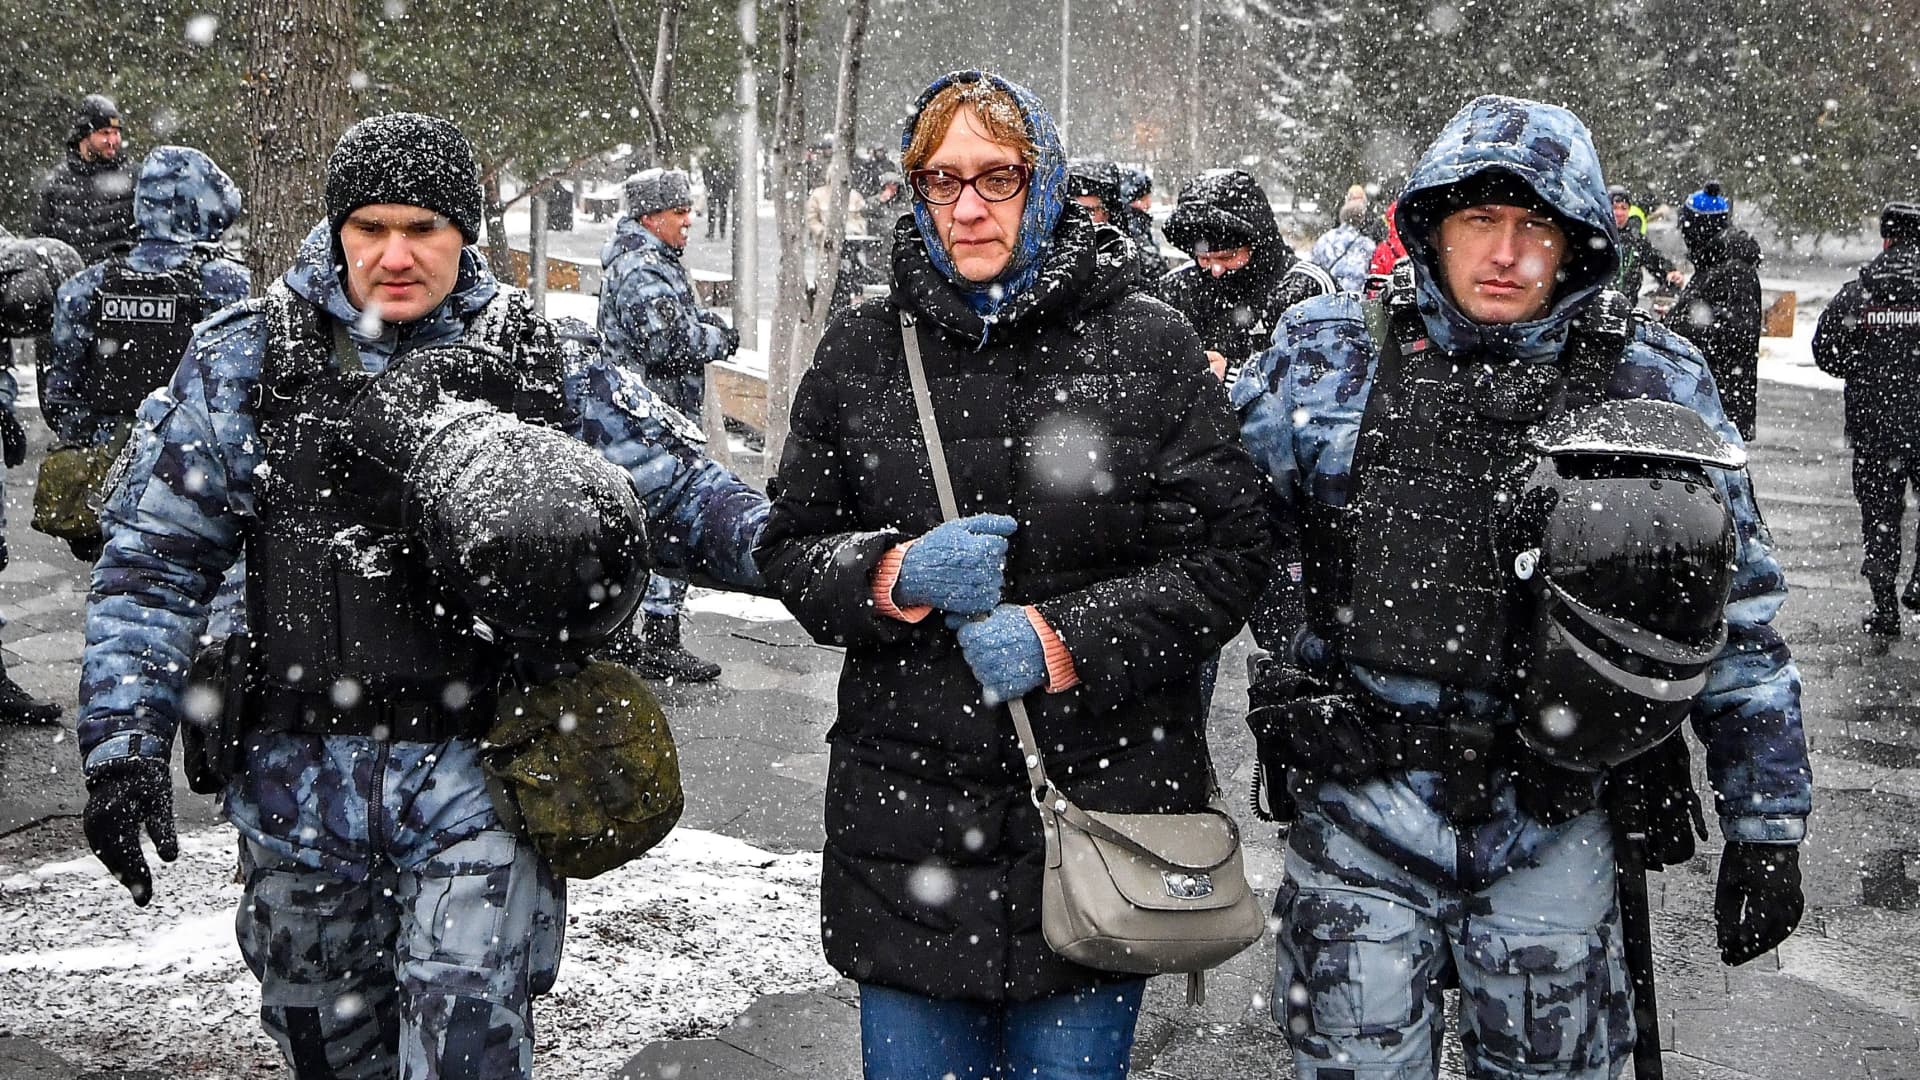 Police officers detain a woman during a protest against Russian military action in Ukraine, in central Moscow on April 2, 2022.